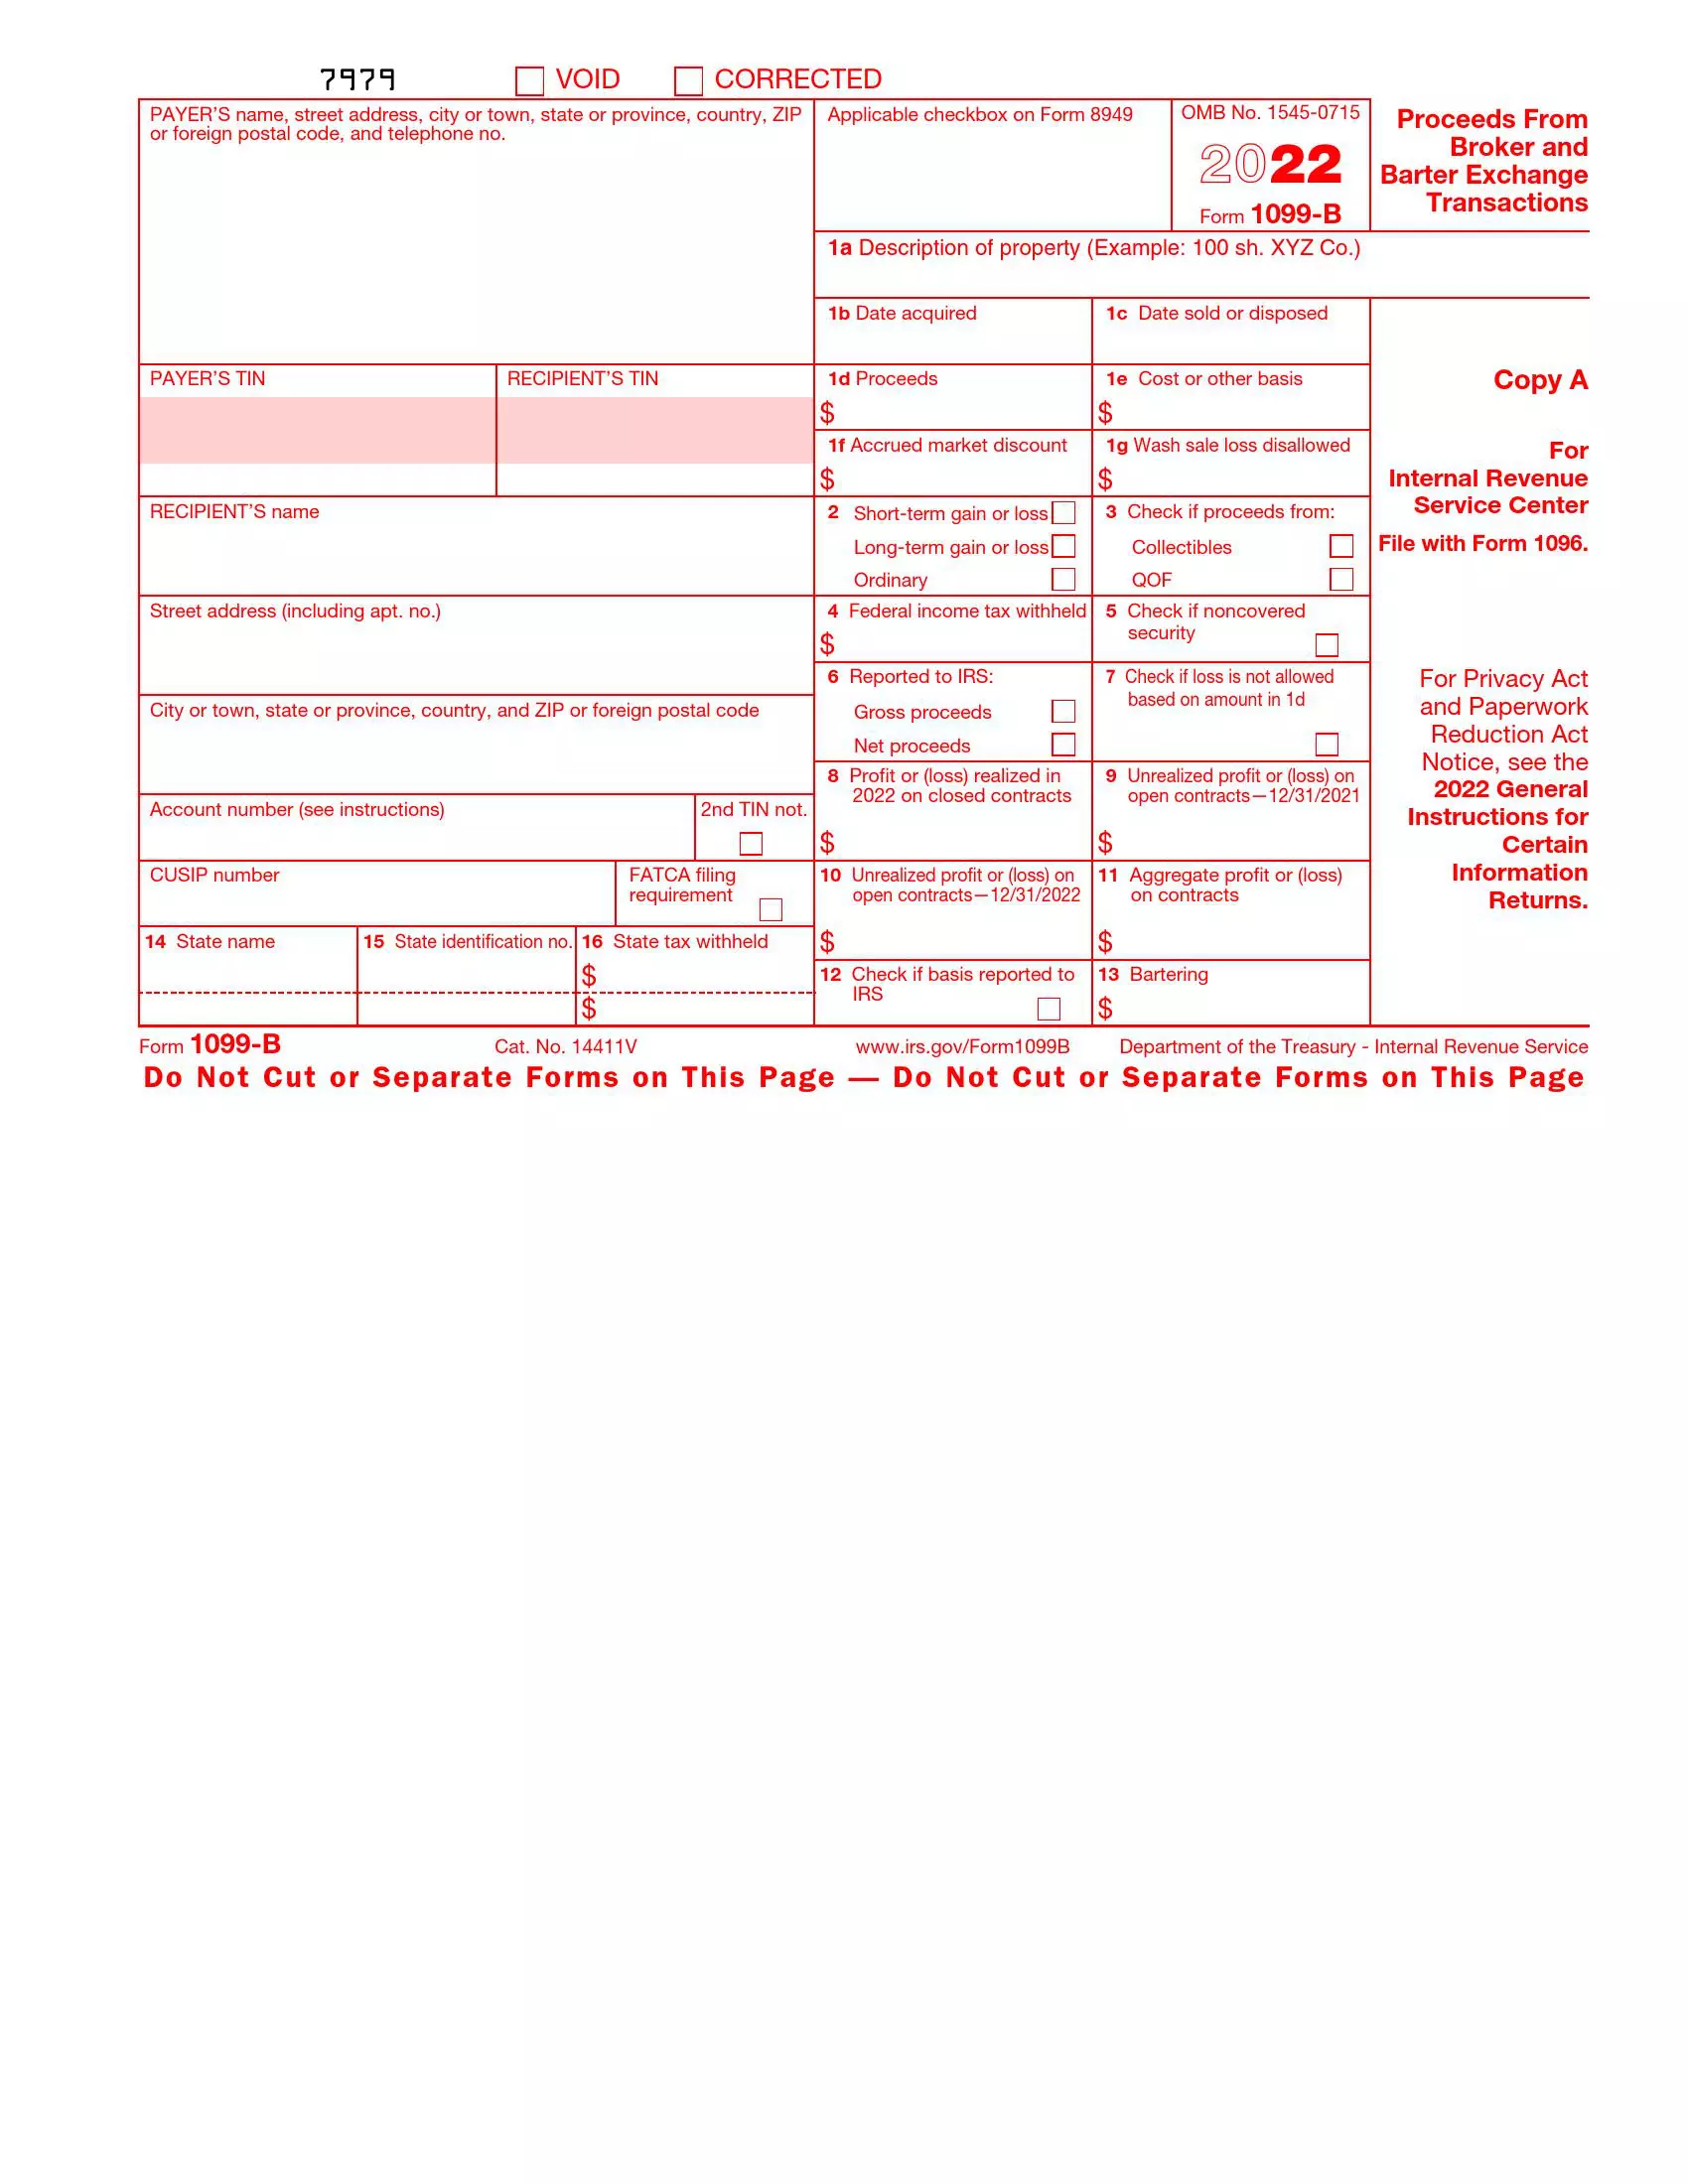 irs form 1099-b 2022 preview